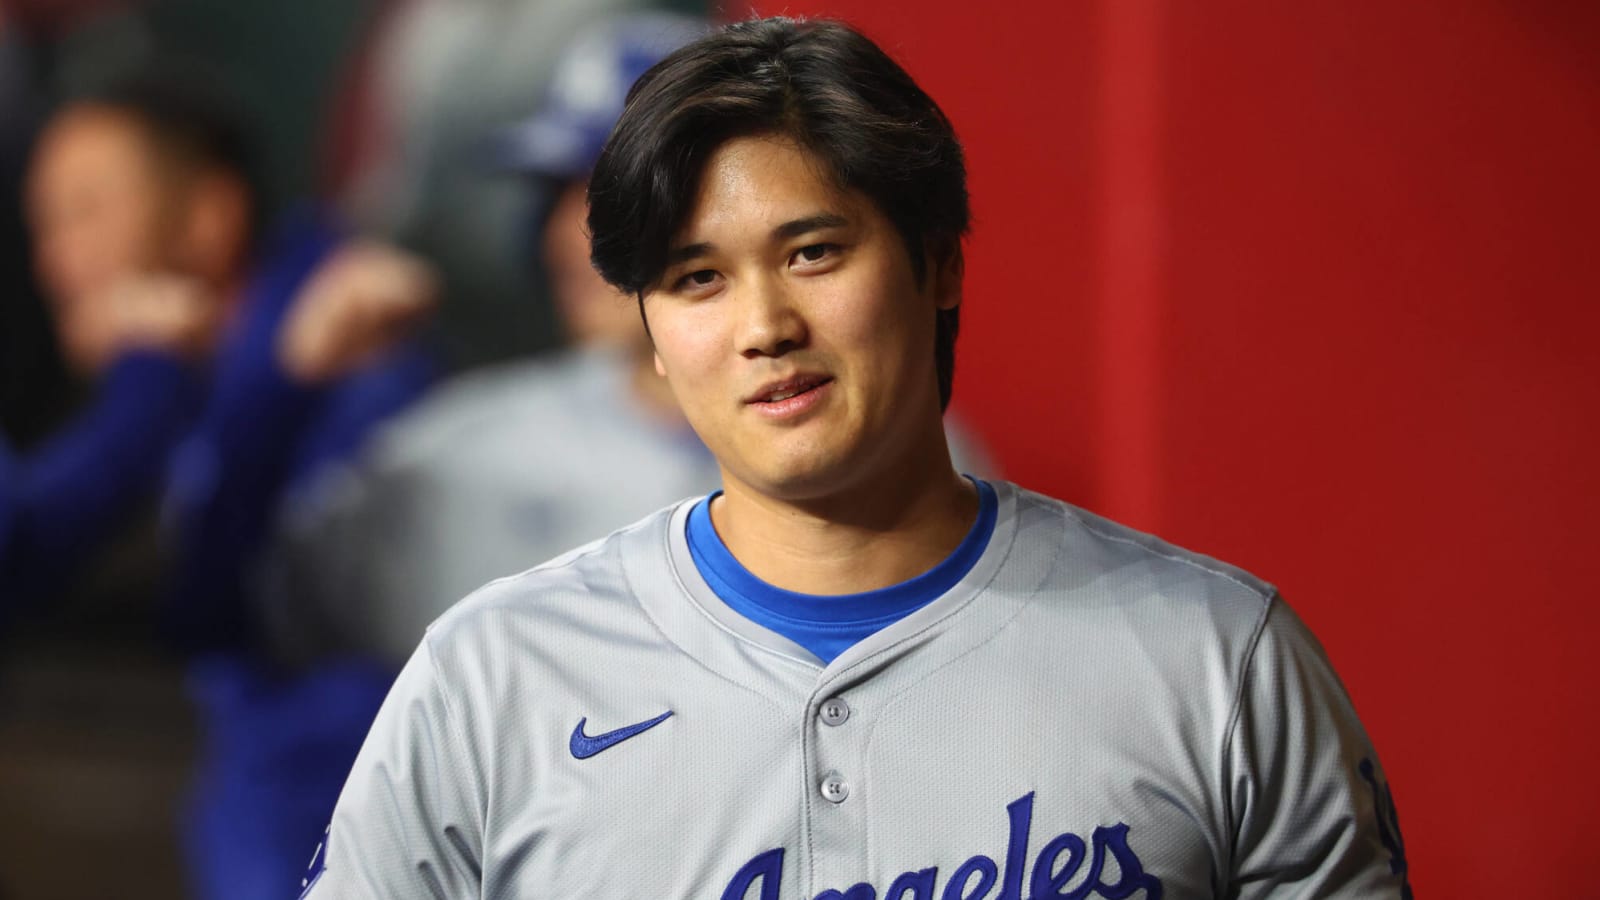 Shohei Ohtani makes appearance with wife at Dodgers event